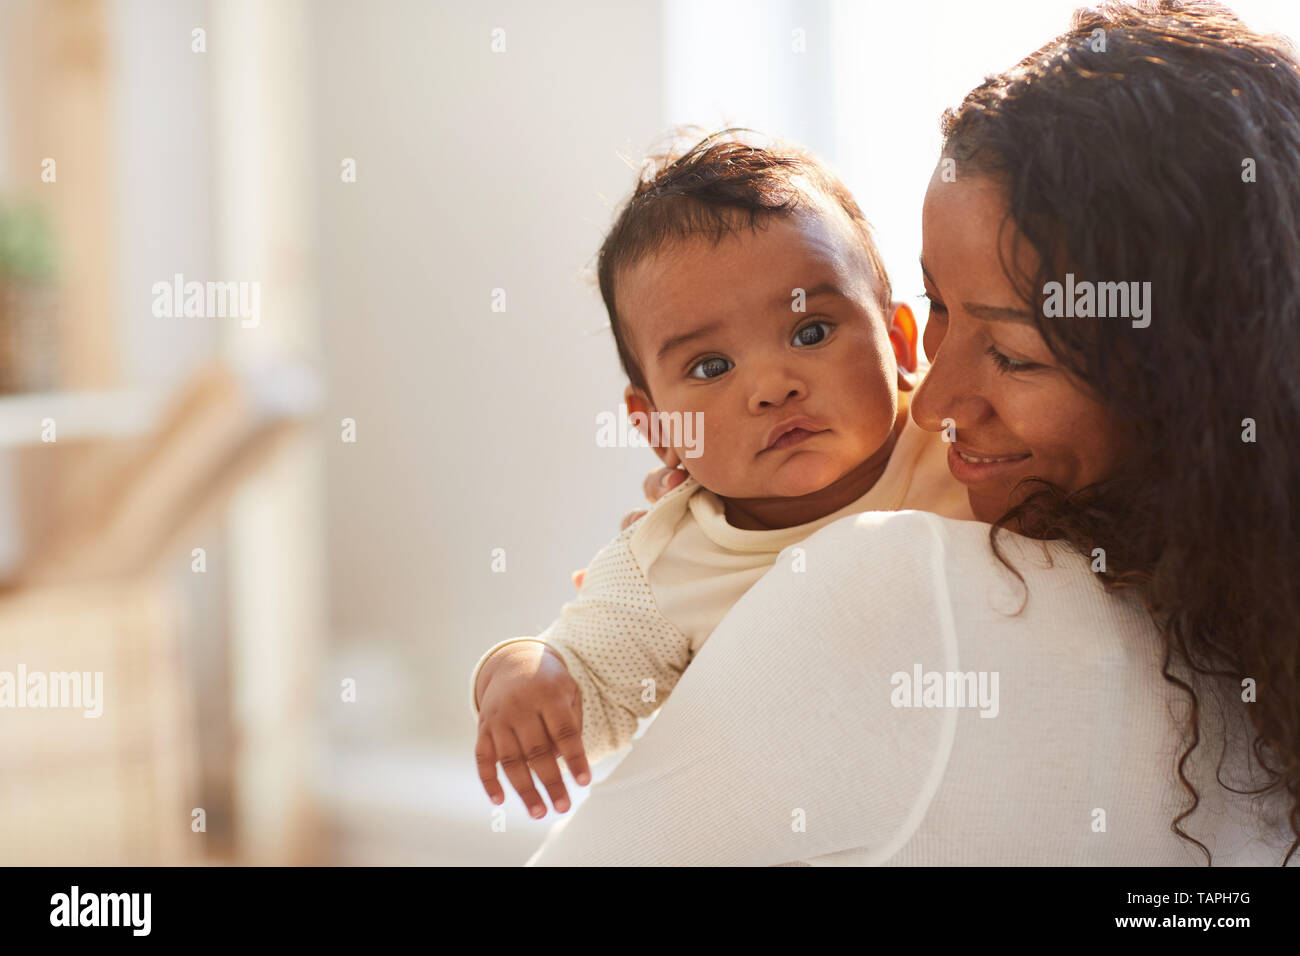 Smiling loving young African mom with curly hair standing in room and holding adorable baby boy with chubby cheeks Stock Photo